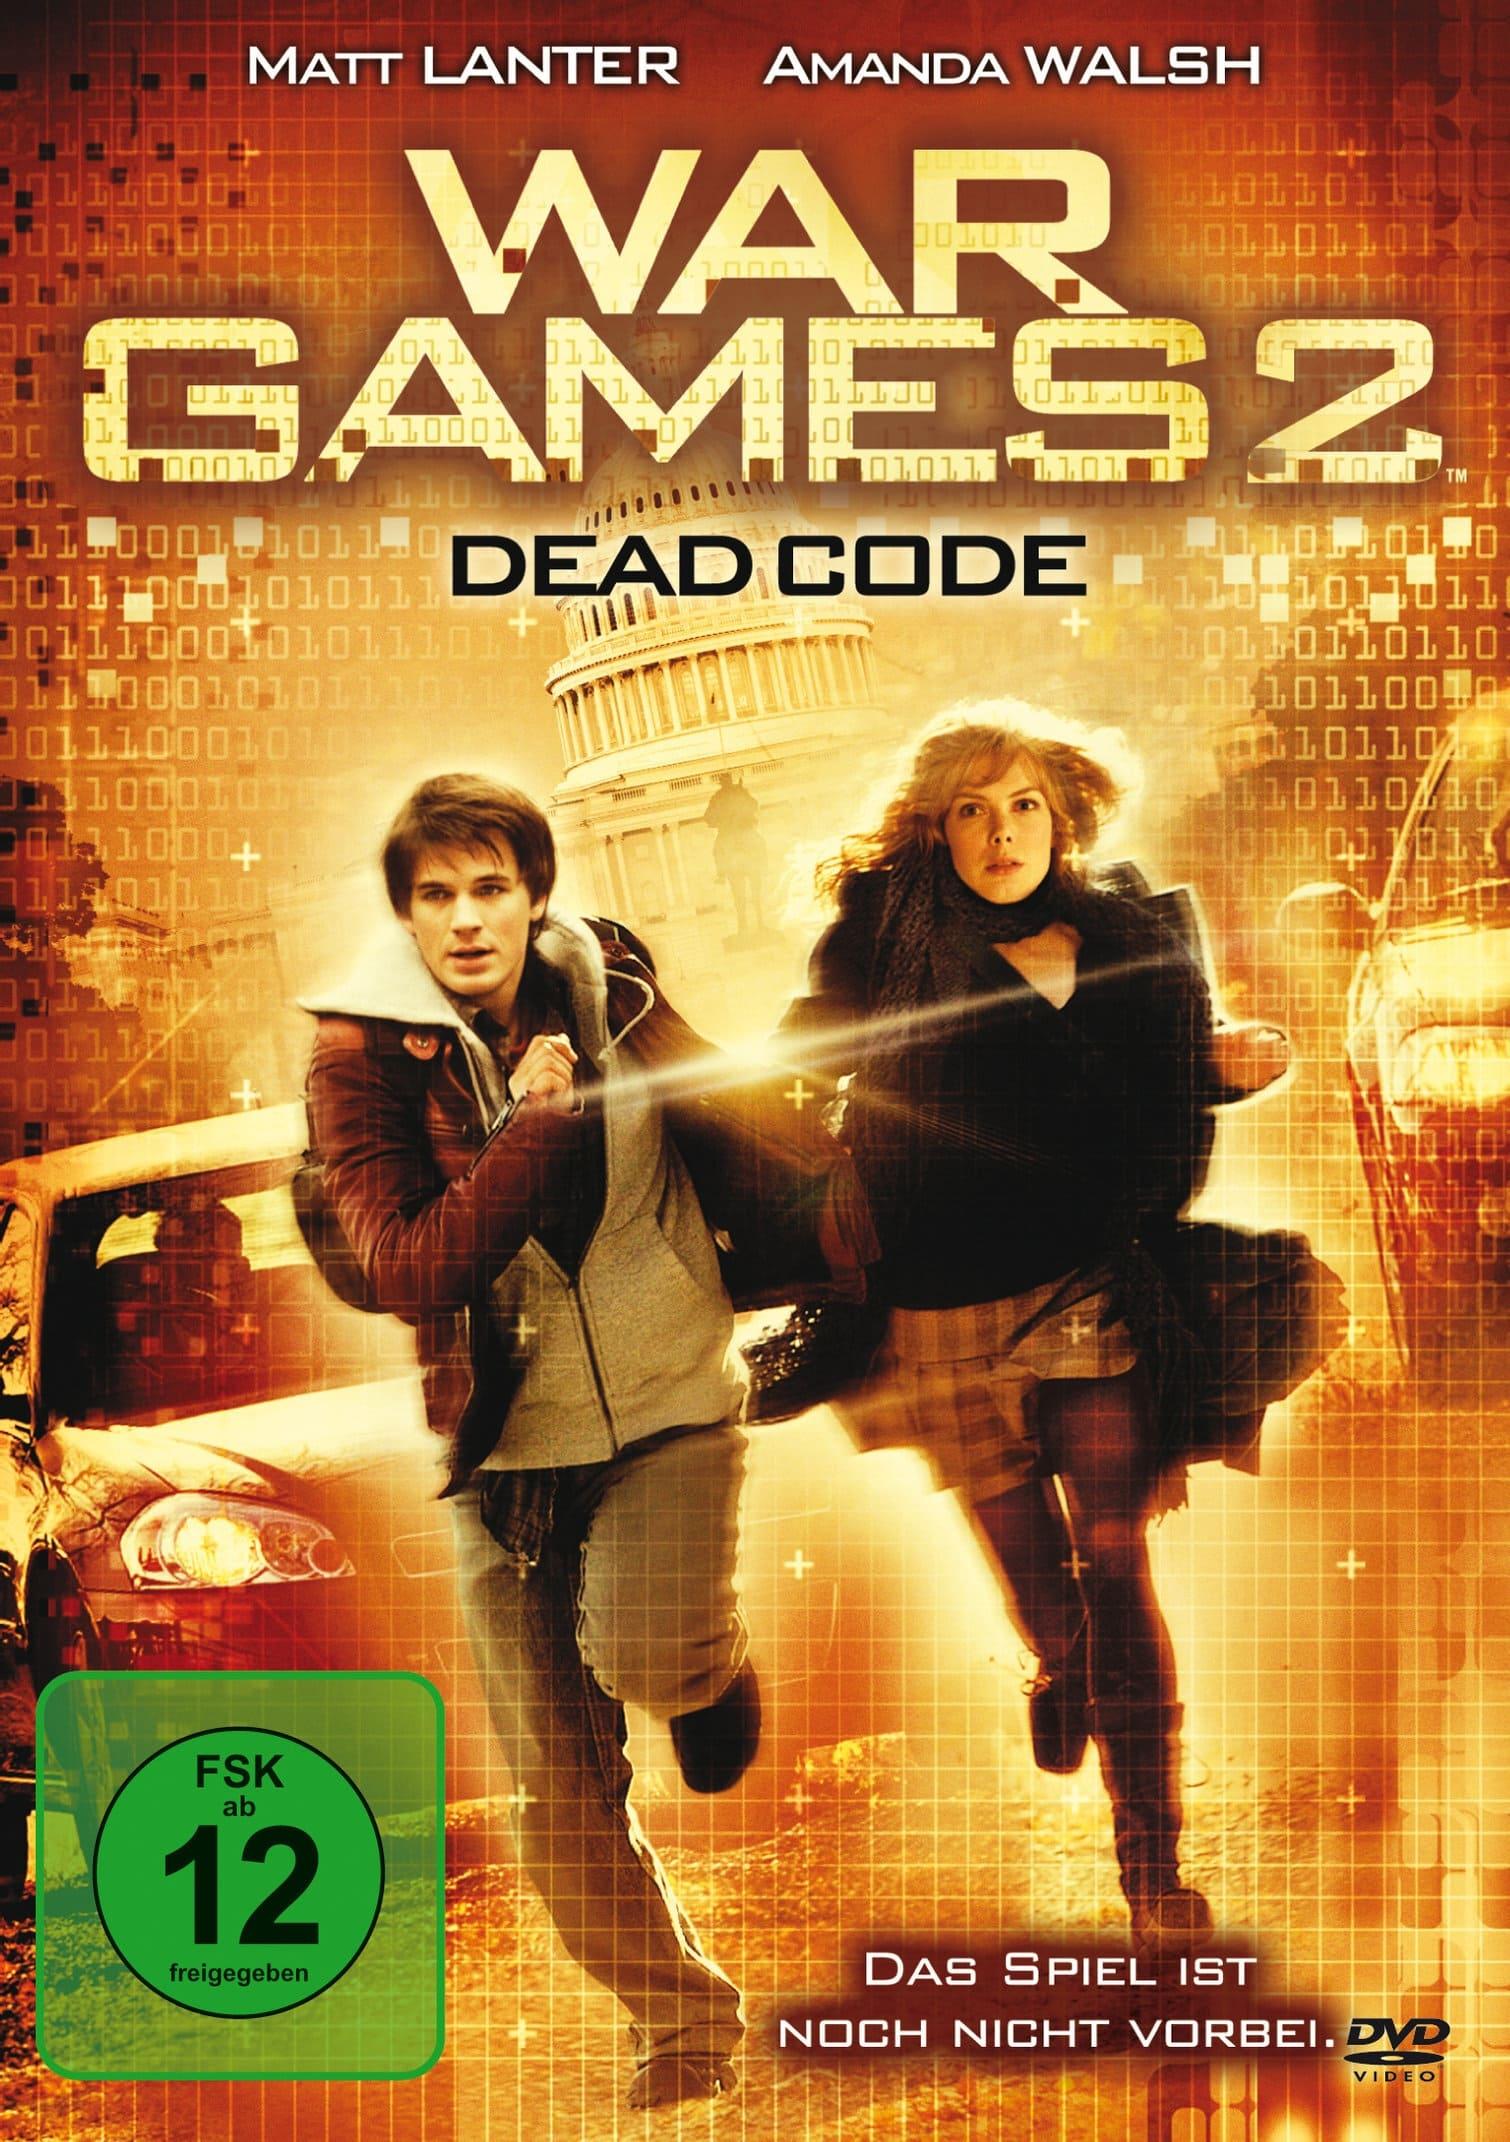 WarGames: The Dead Code poster